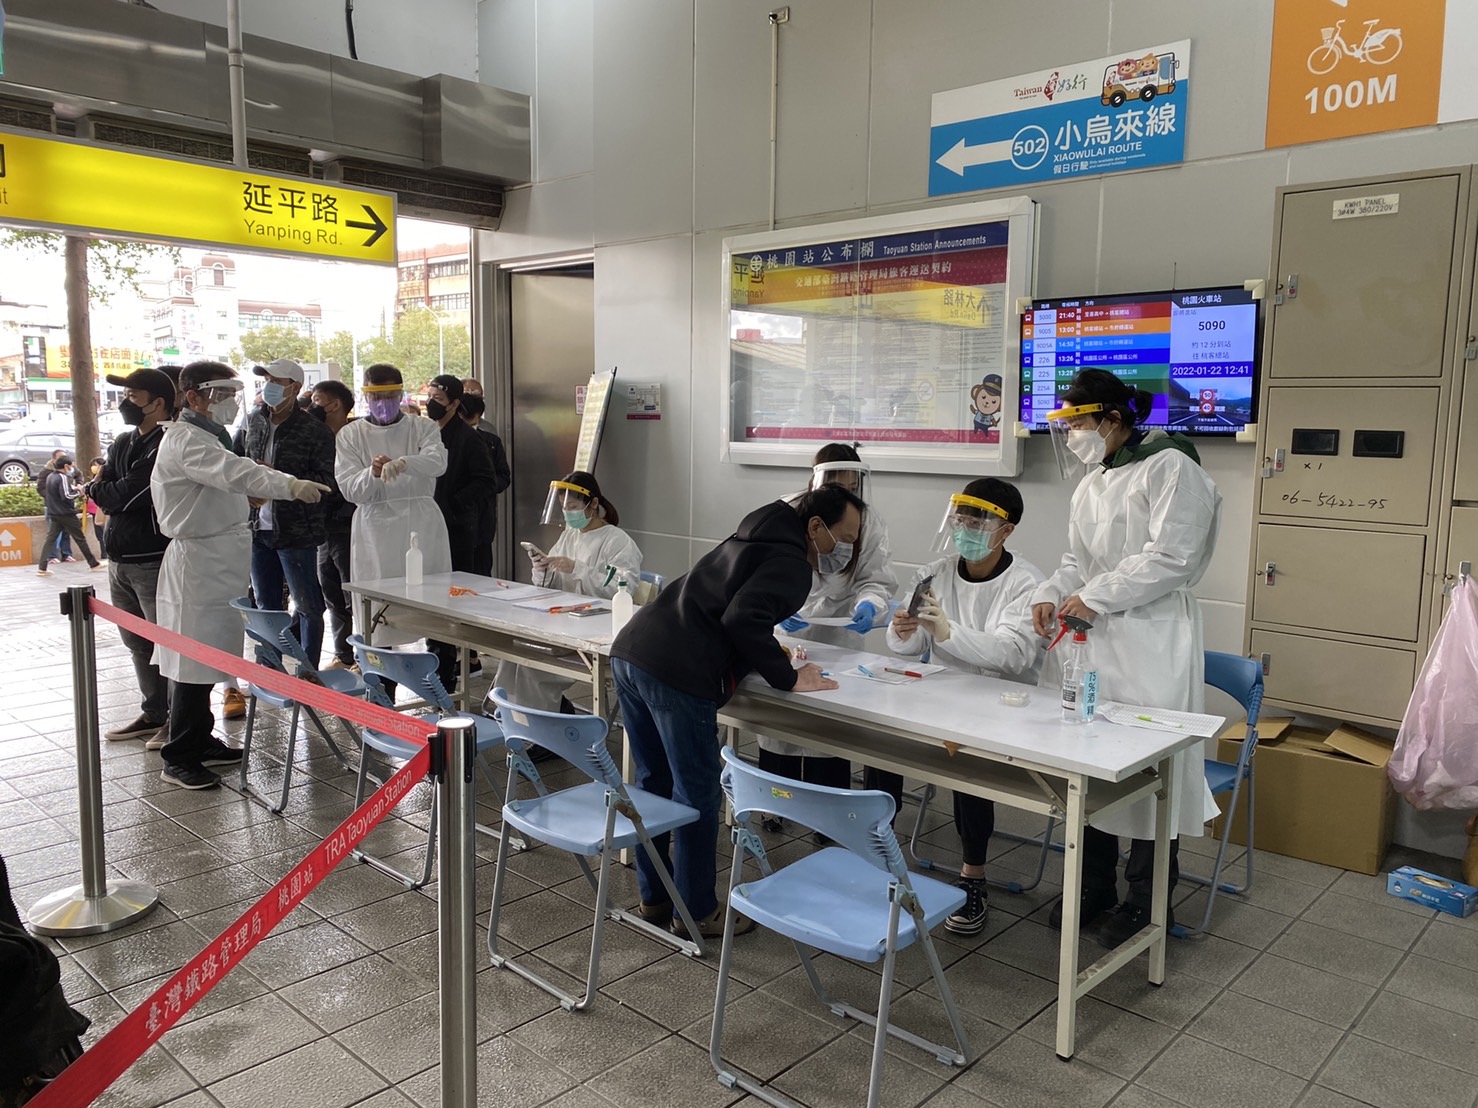 Taoyuan City Brigade collaborated with the Health Bureau and set up vaccination sites. (Photo / Provided by Taoyuan City Brigade)